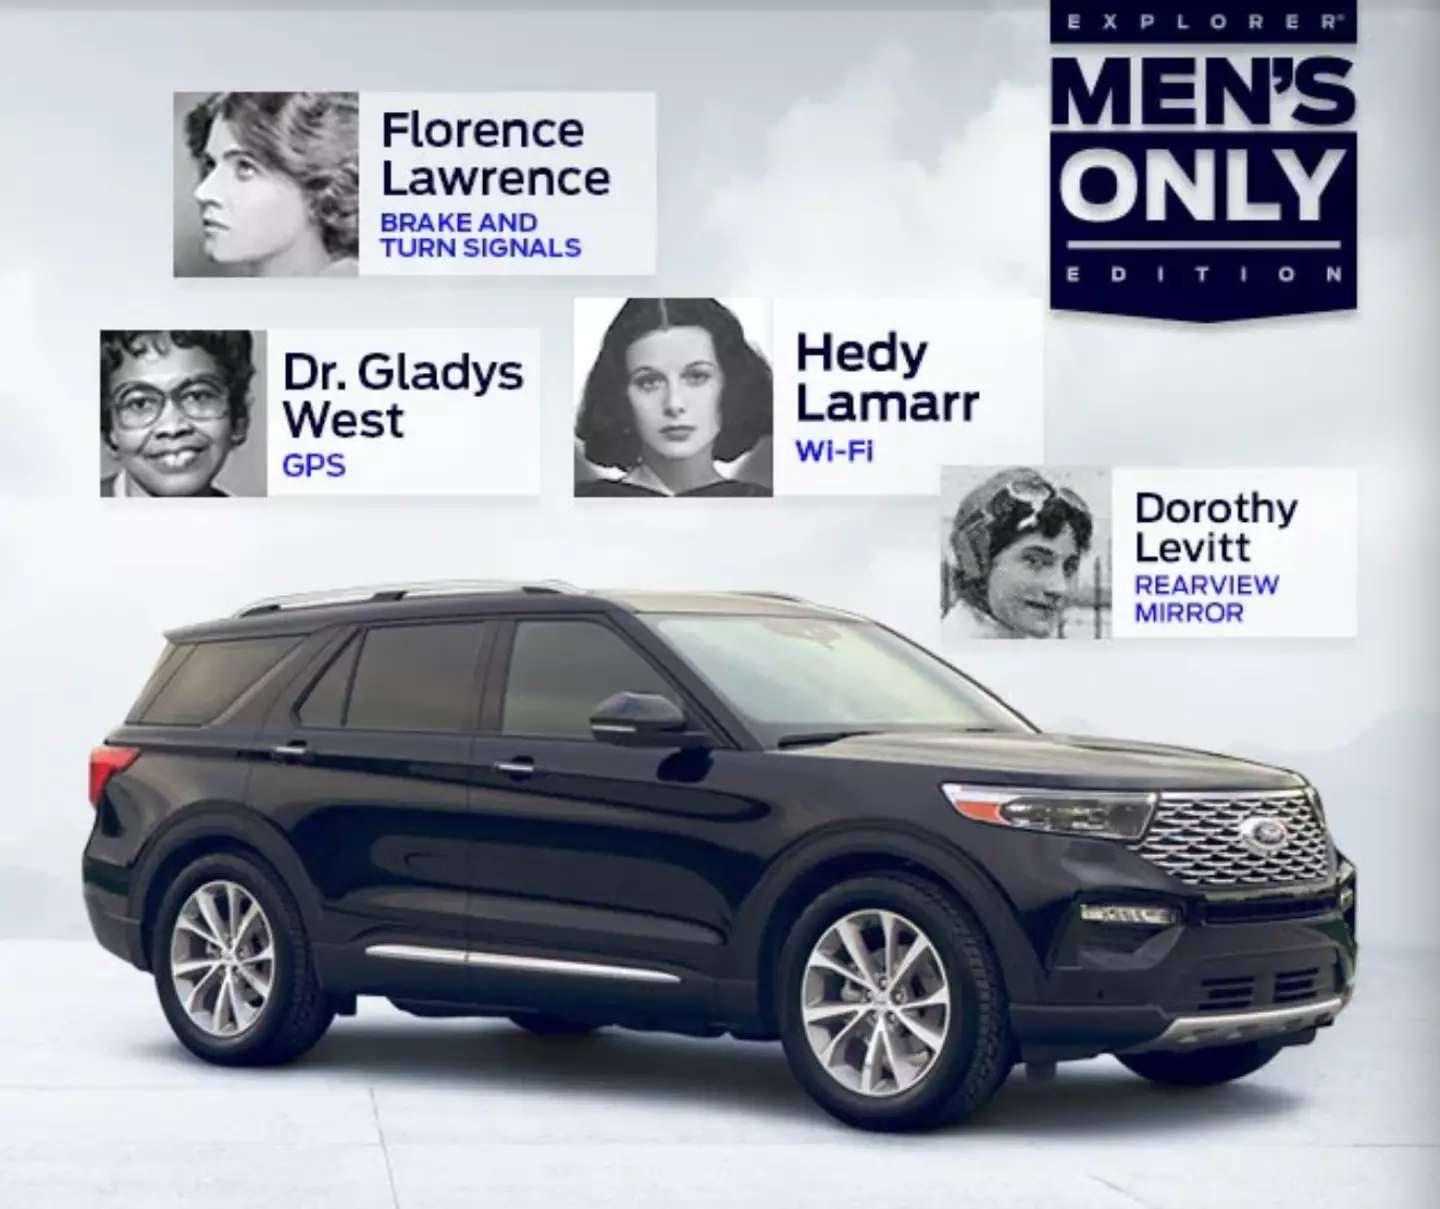 Dozens of women have made important contributions to the automobile industry.